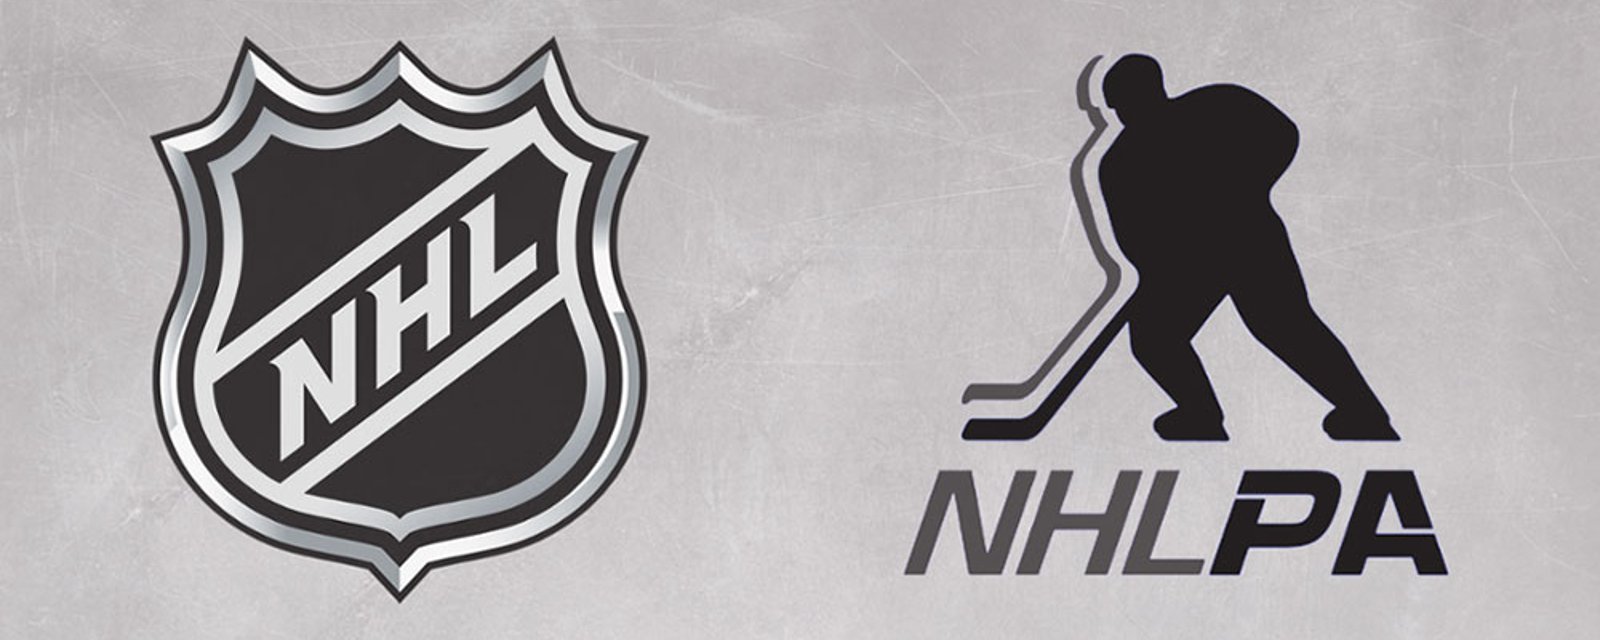 NHL announces new “transition rules” for 2021-22 season